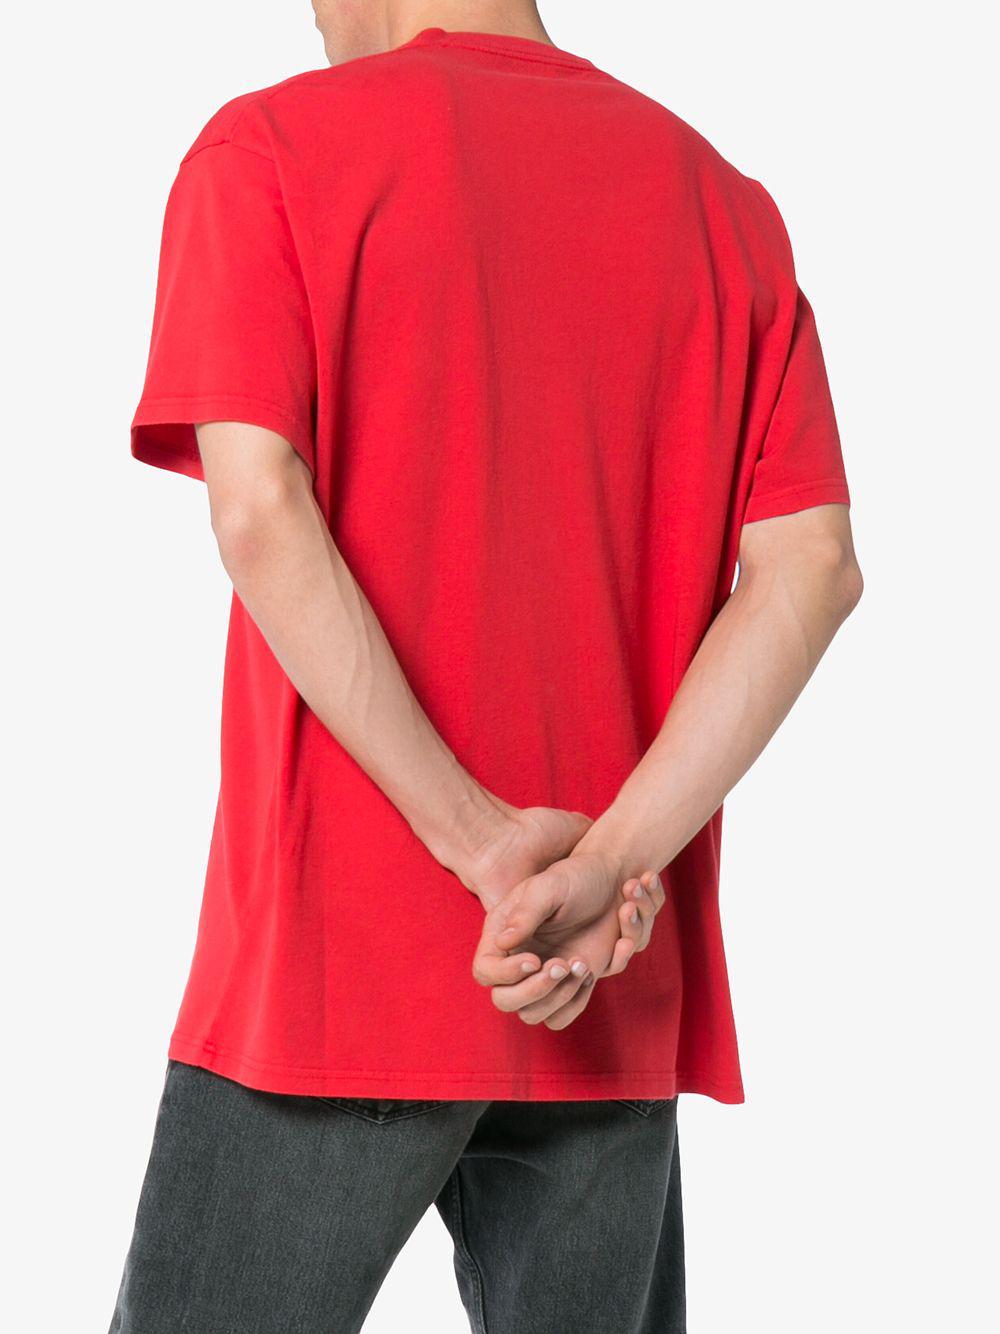 Balenciaga Cotton Oversized Copyright Logo T-shirt in Red for Men - Lyst